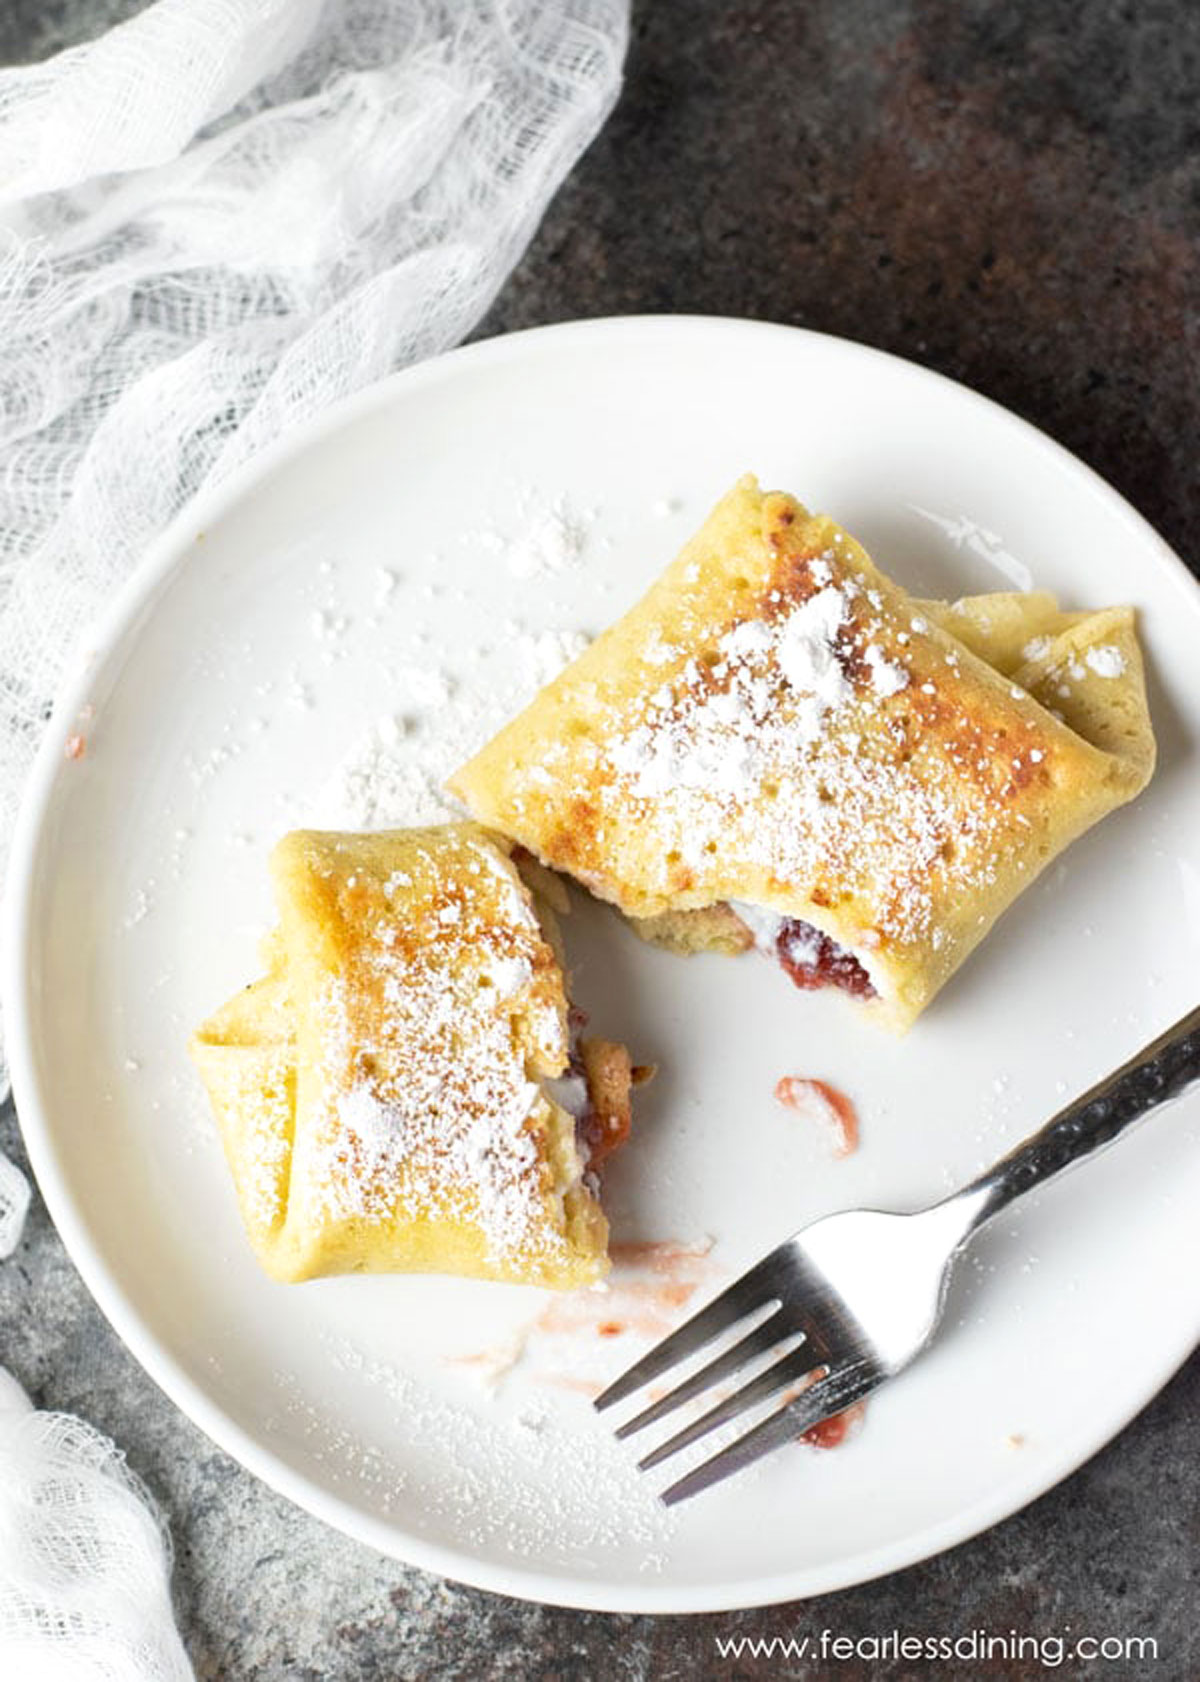 A cheese blintz cut on a plate. It was dusted with powdered sugar.